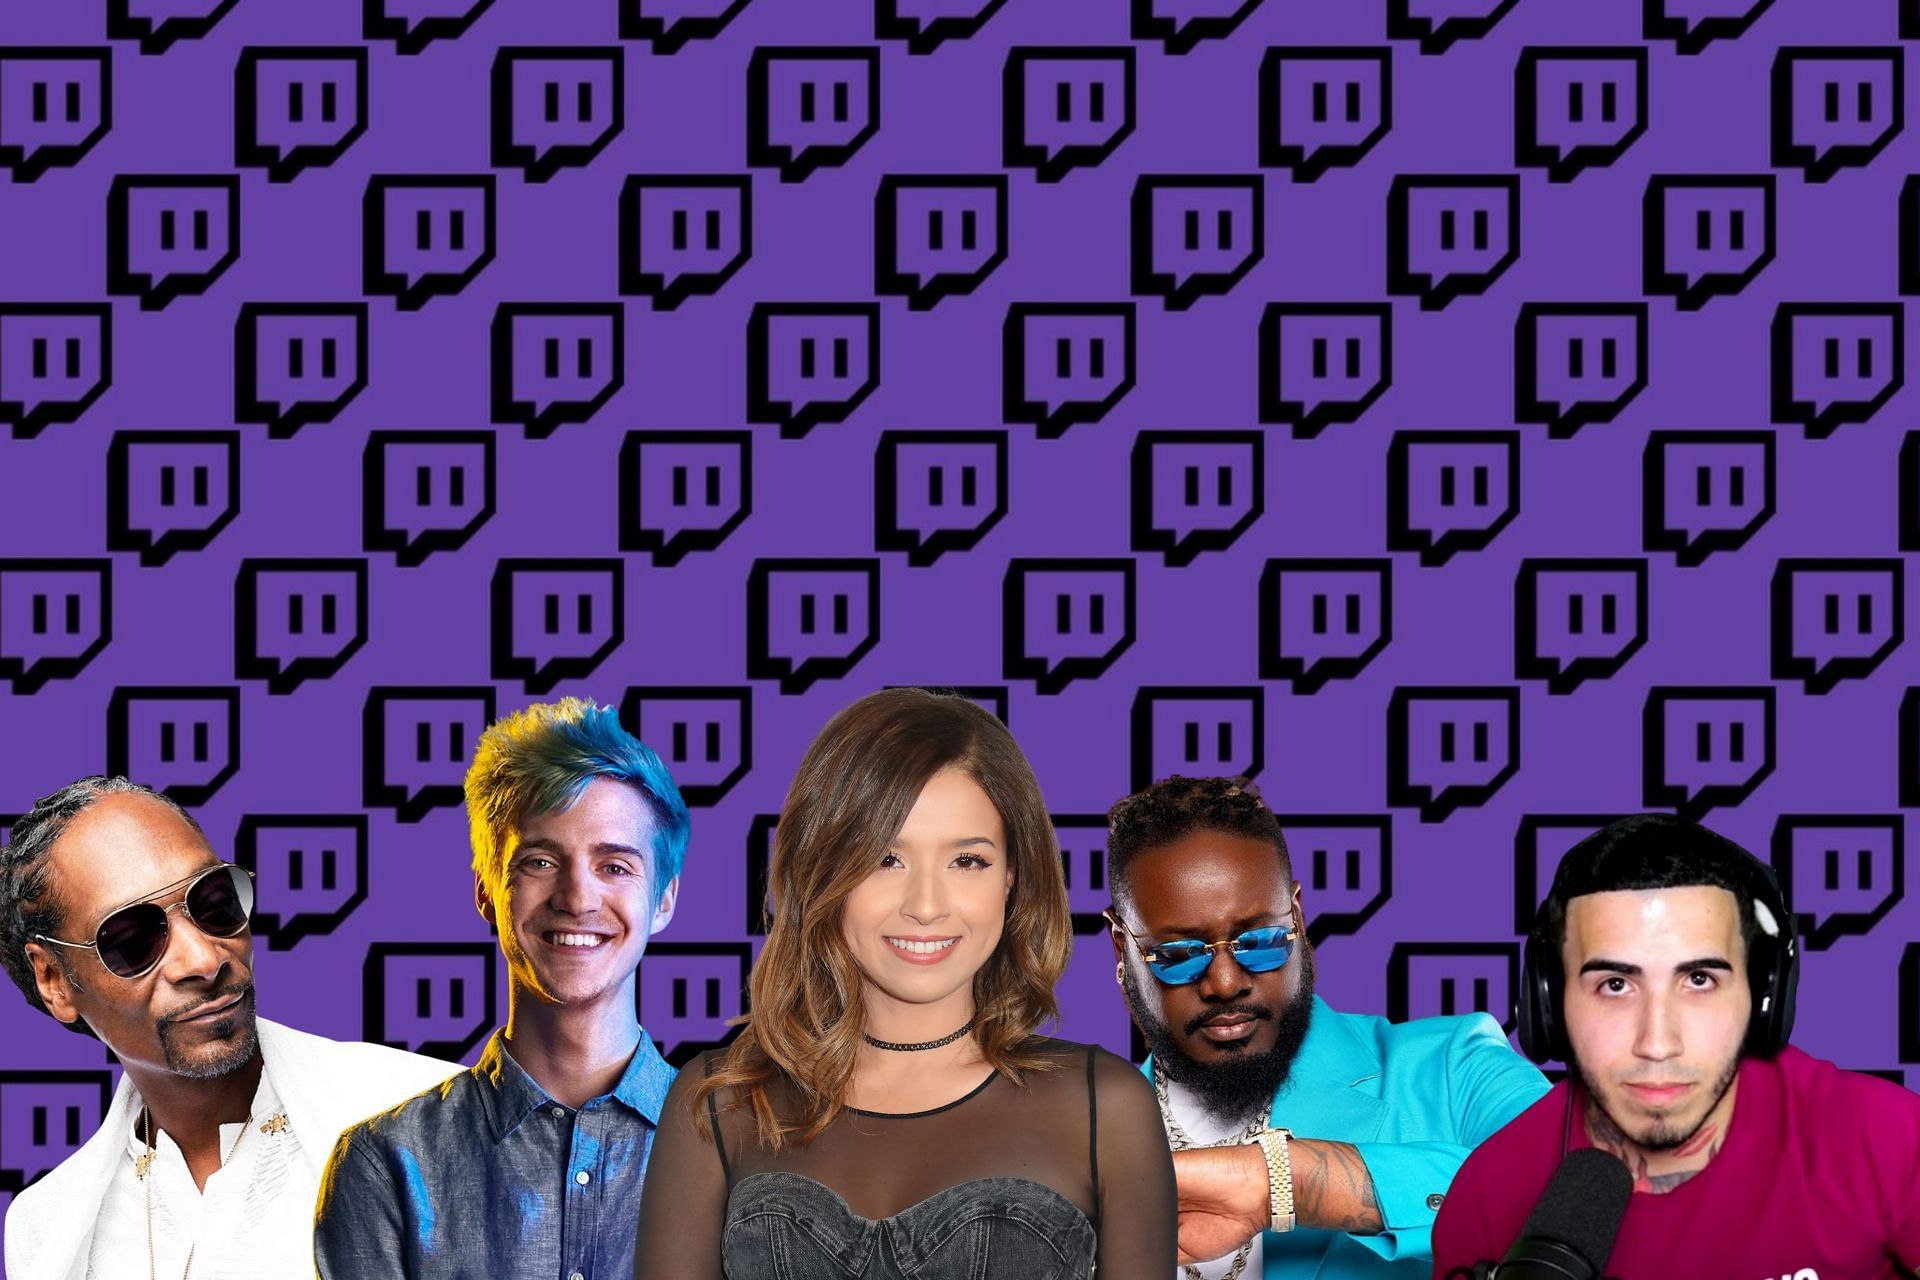 5 times streamers lost their cool and rage quit on livestream